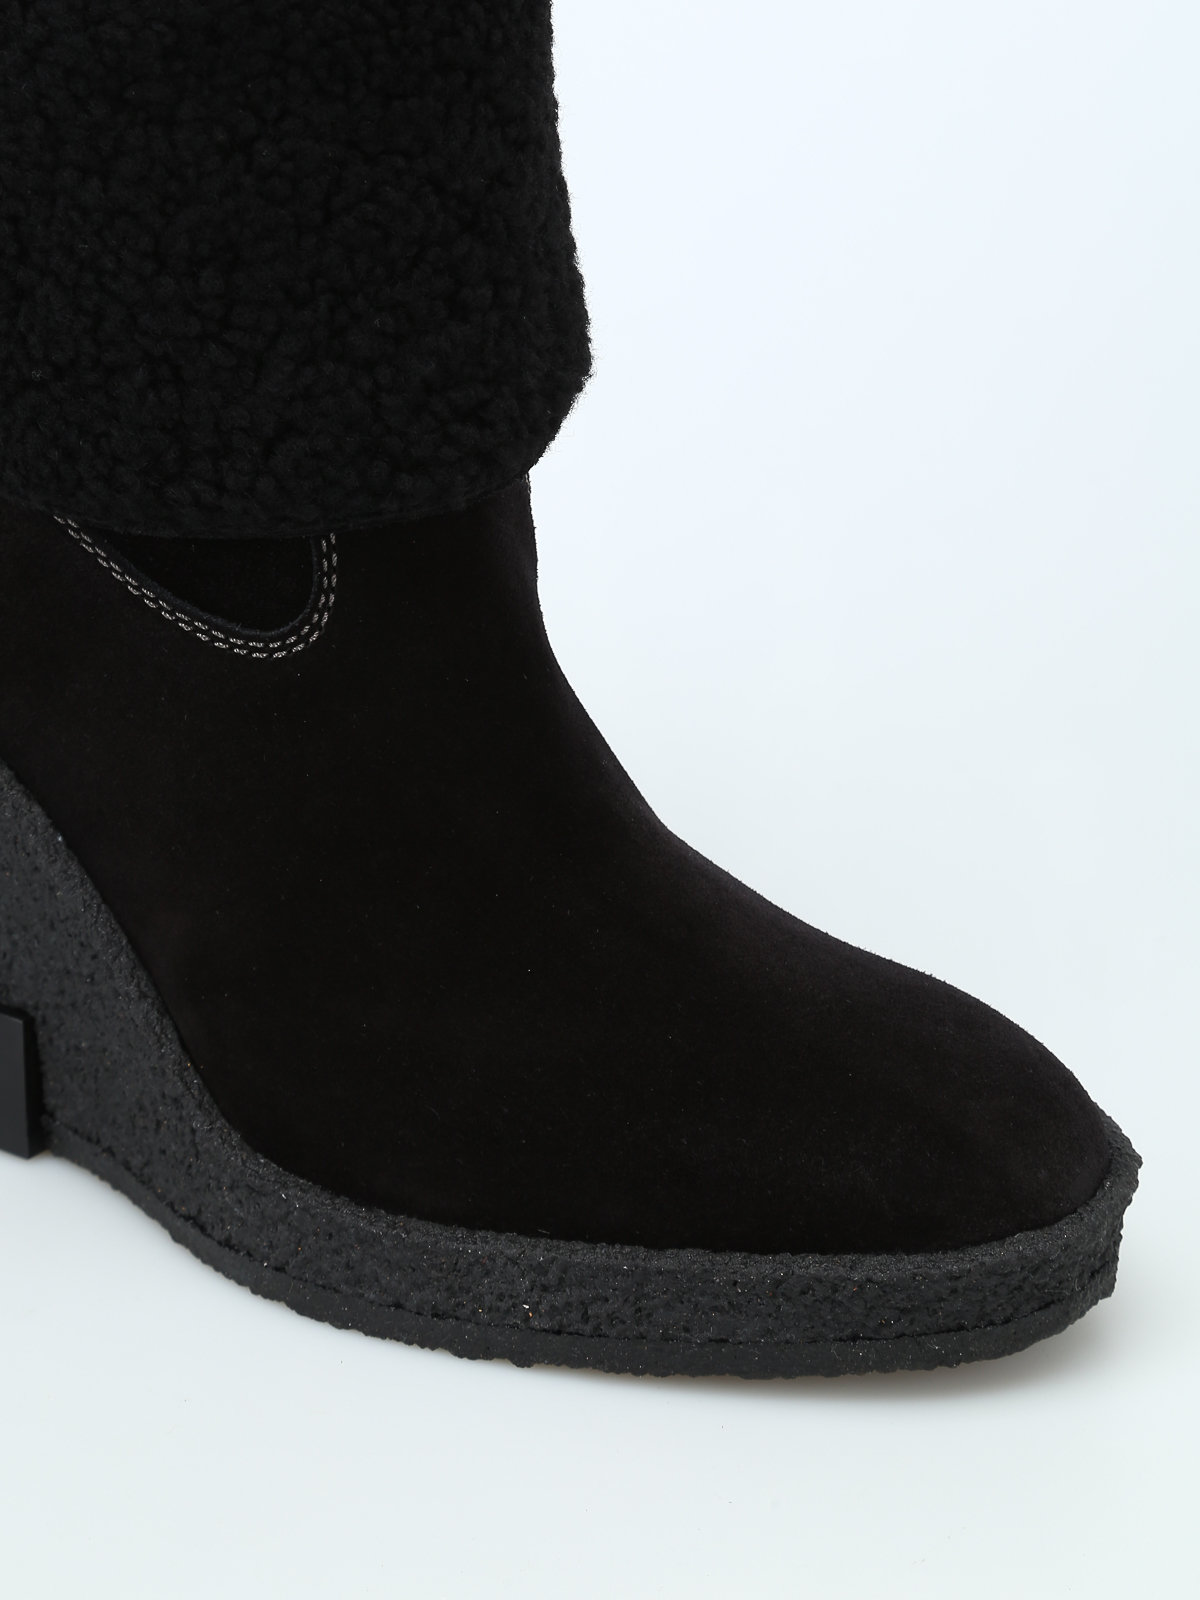 black suede wedges ankle boots